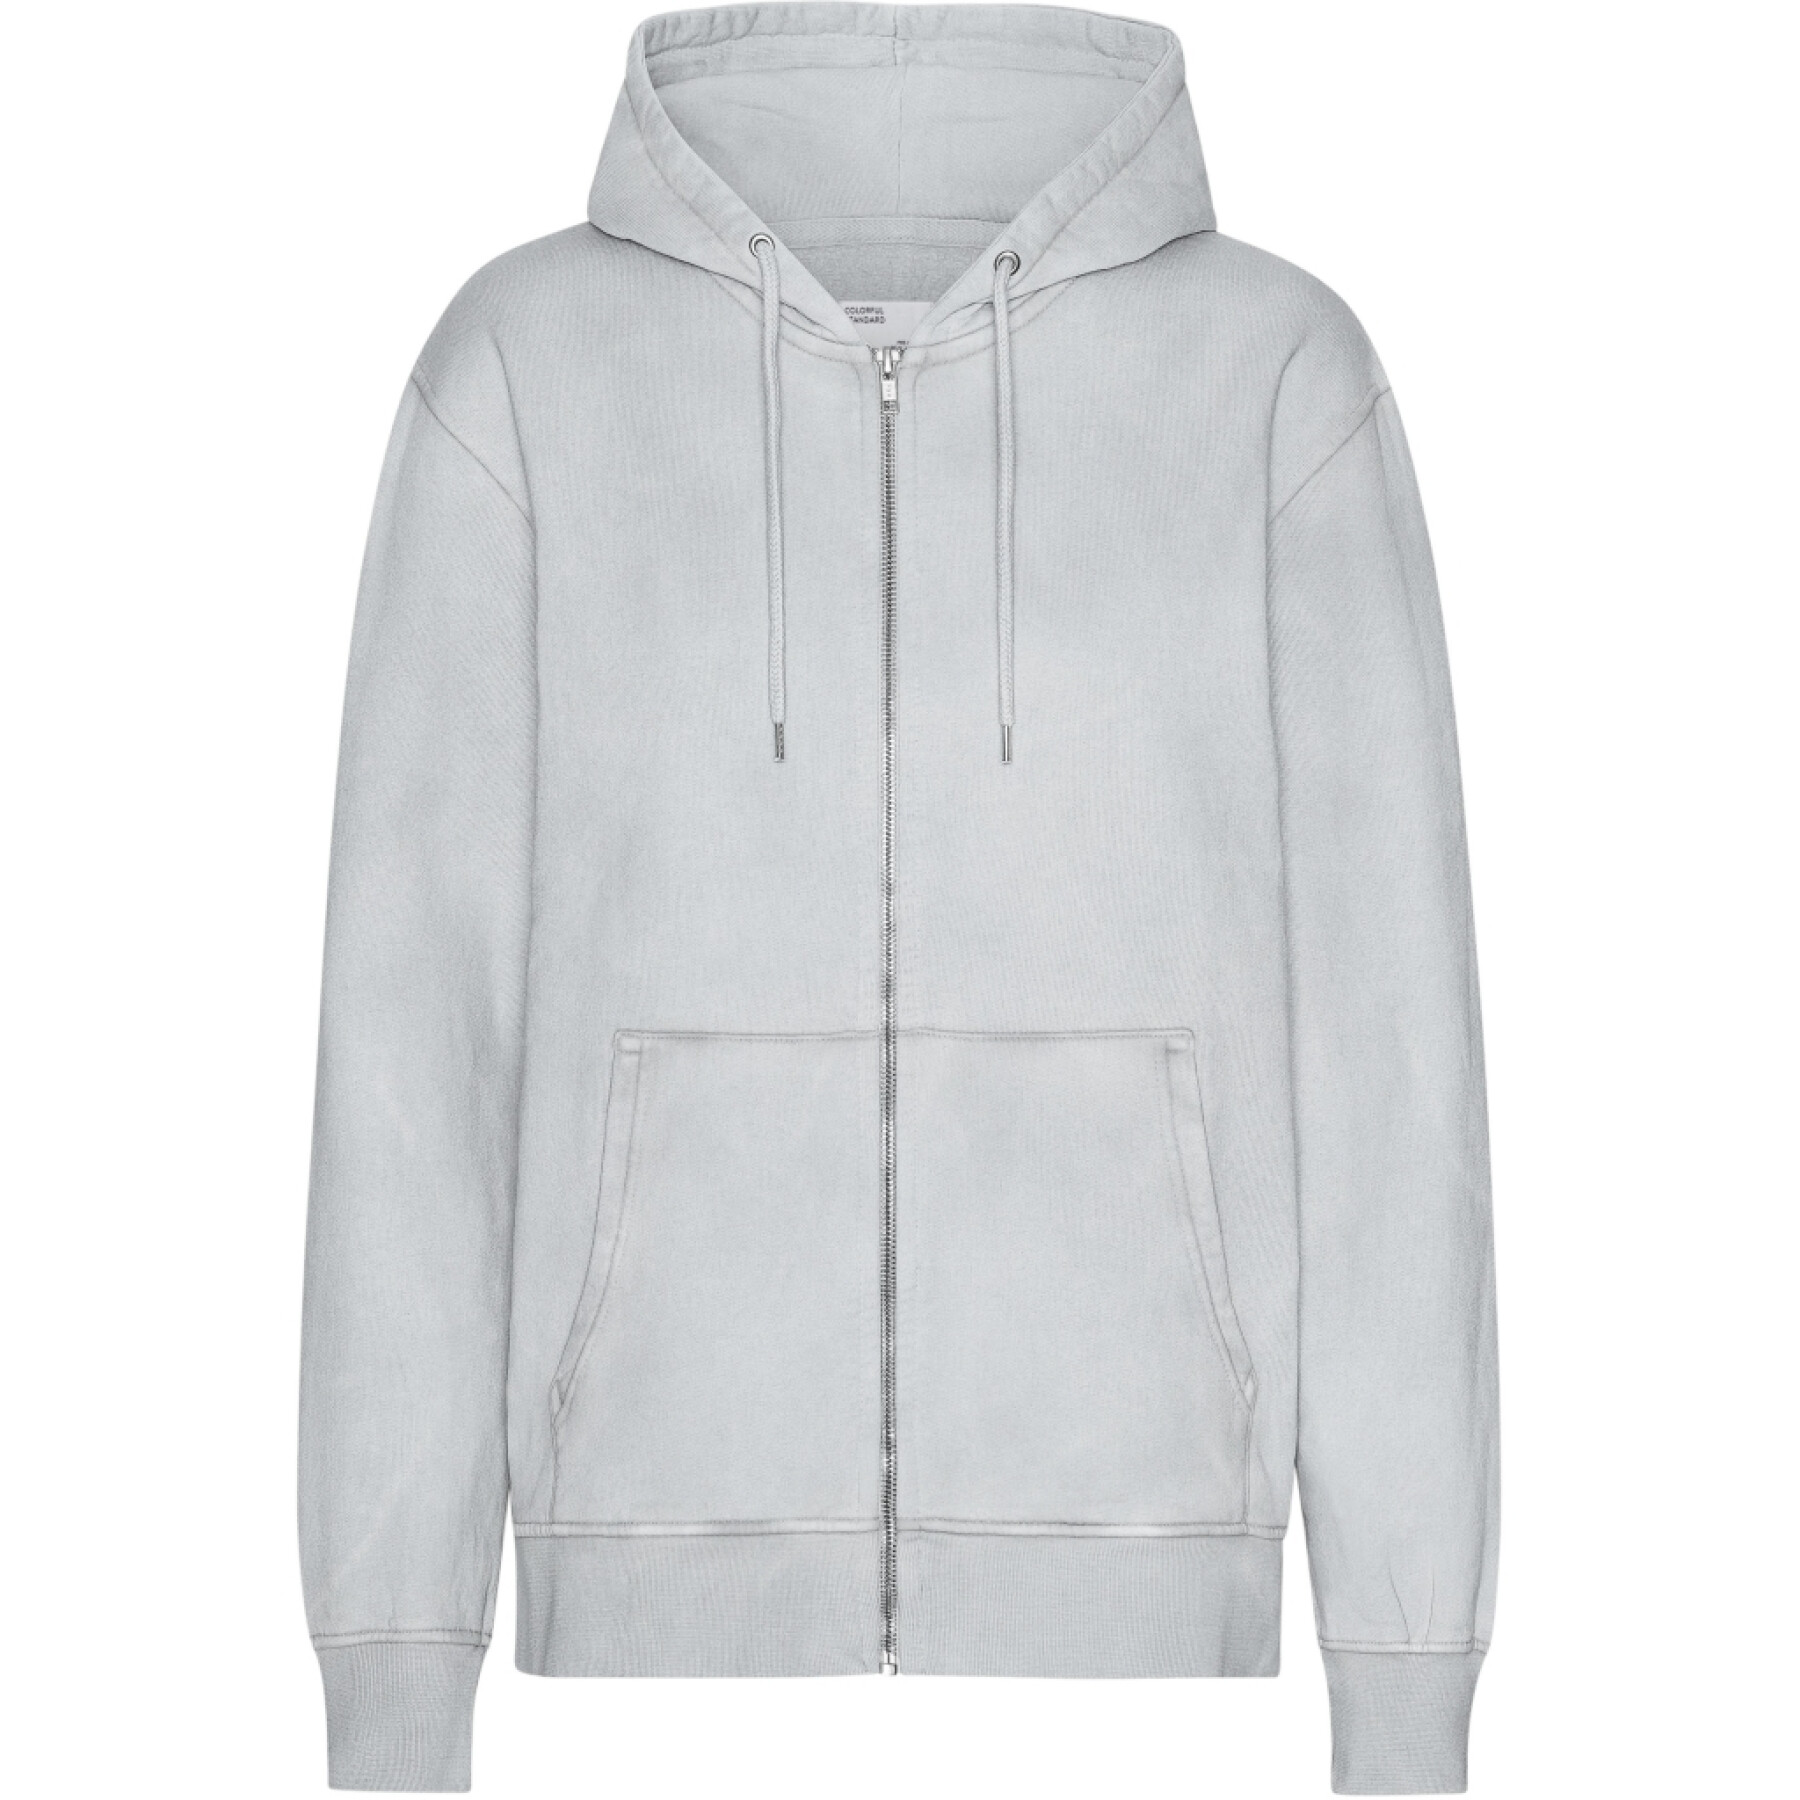 Zip-up hoodie Colorful Standard Classic Organic Faded Grey